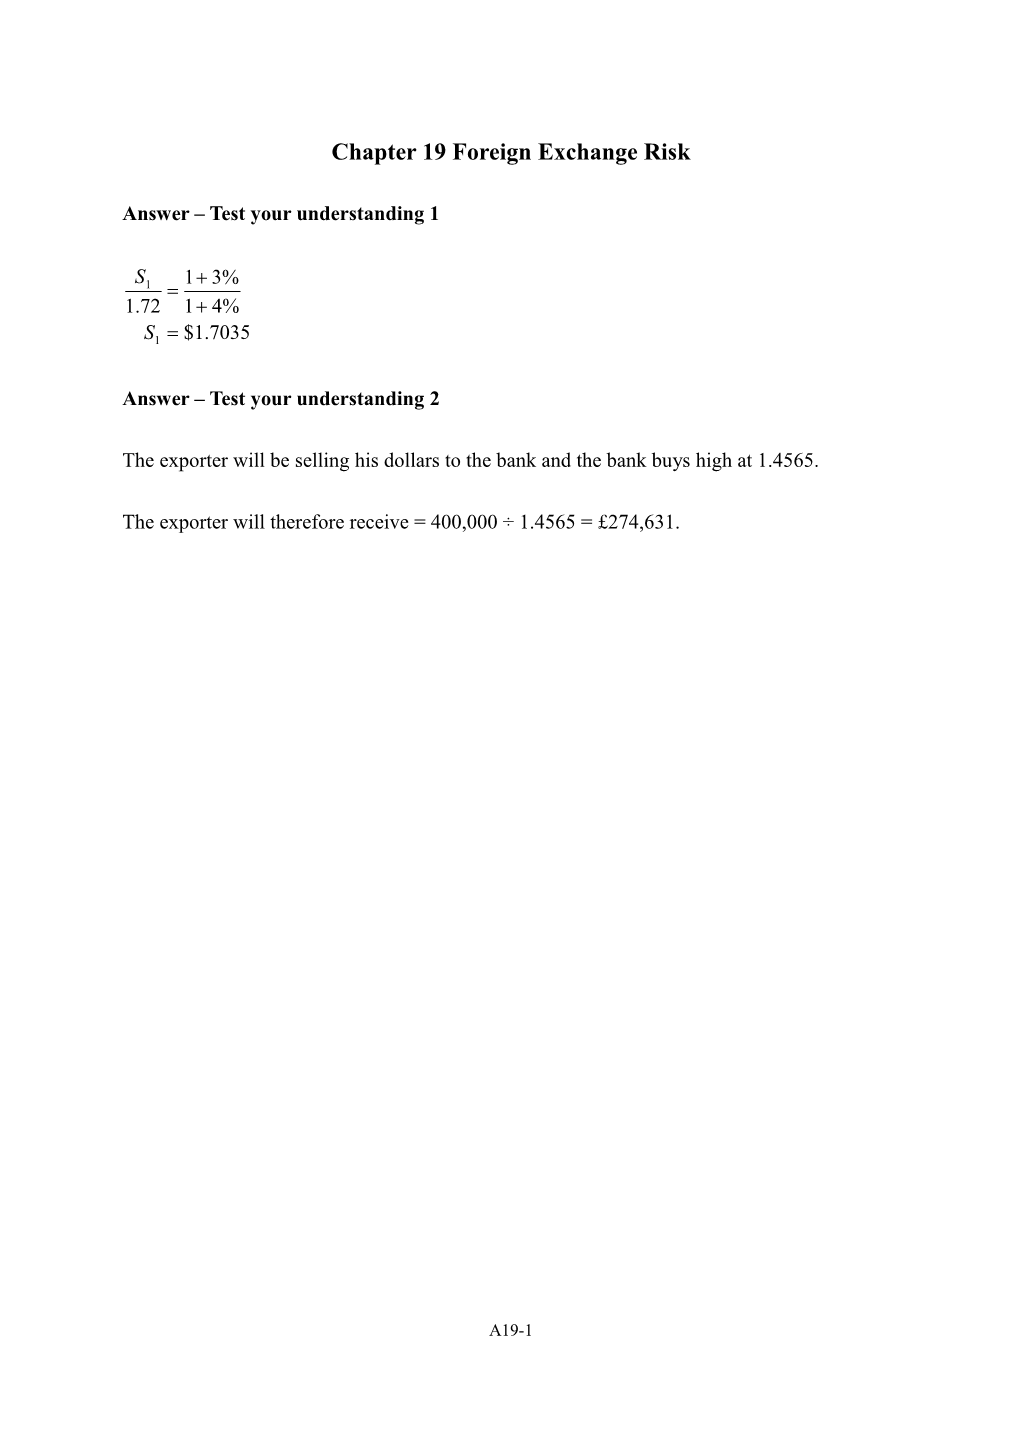 Chapter 17 Foreign Exchange Risk s1